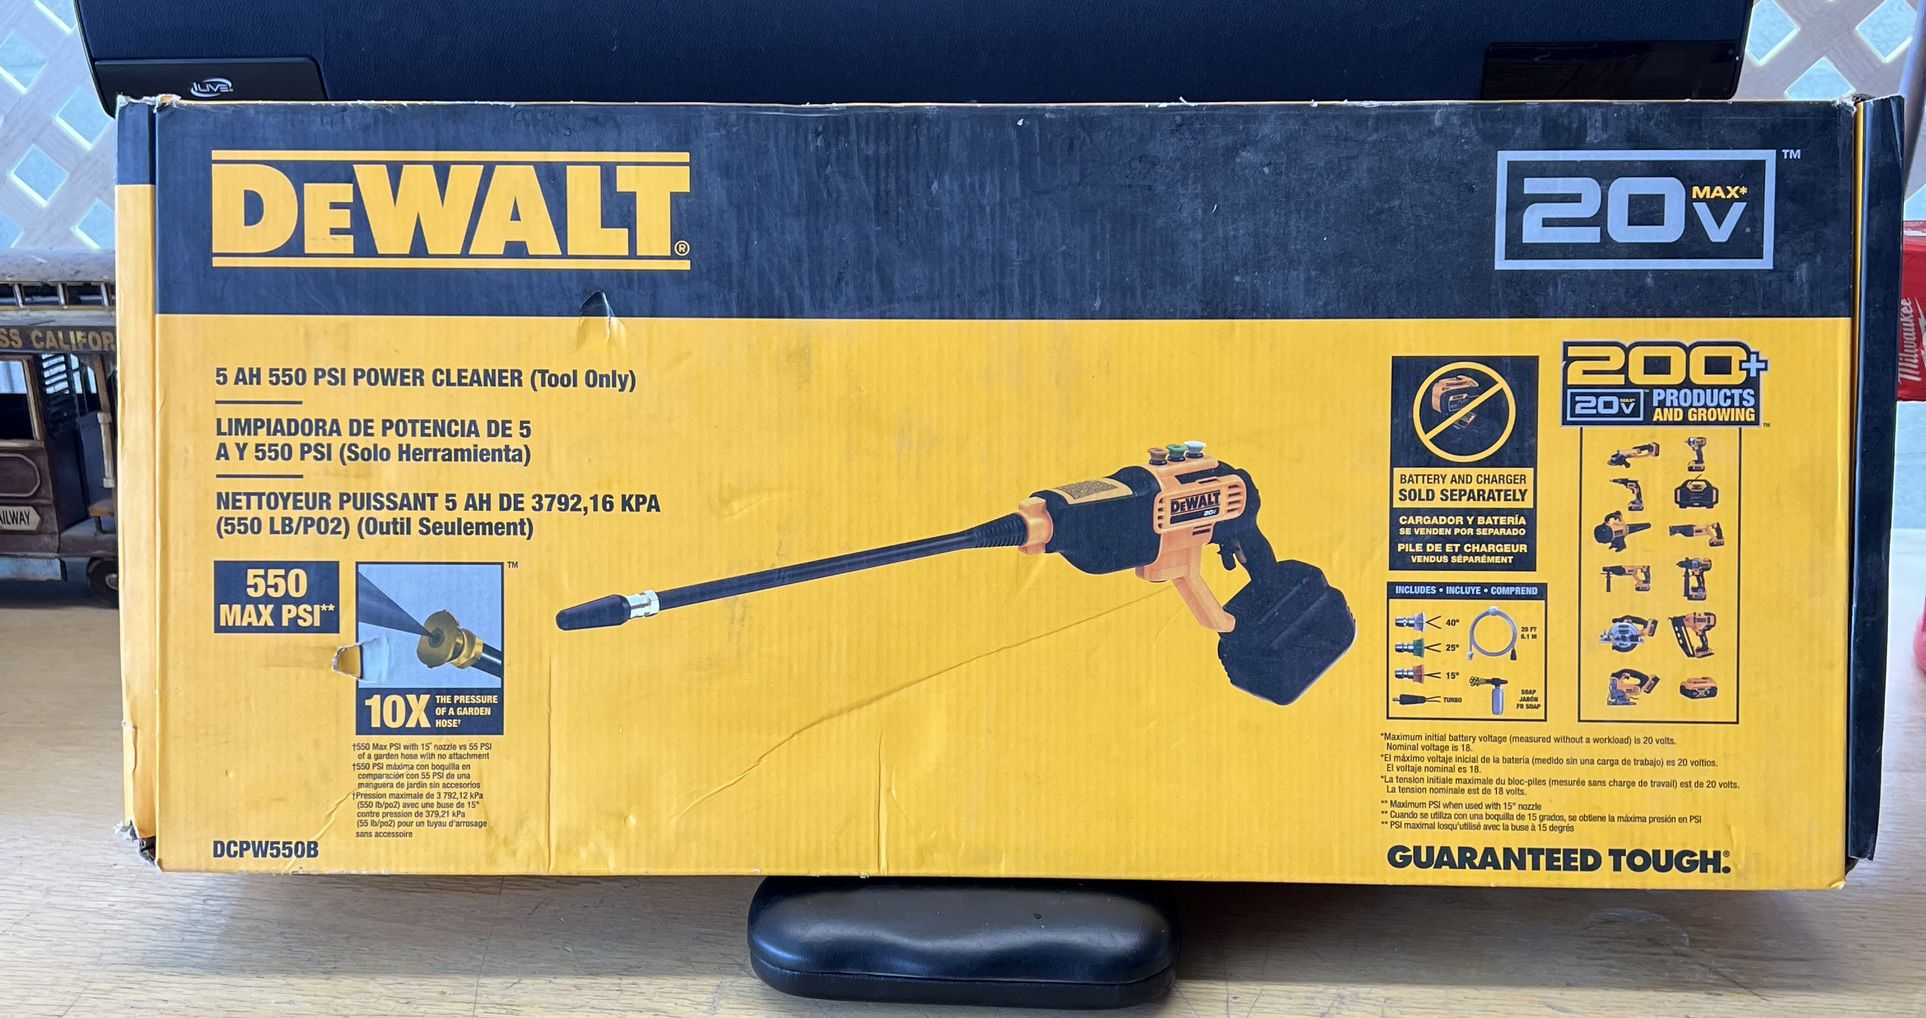 DEWALT 20V MAX 550 PSI 1.0 GPM Cold Water Cordless Electric Power Cleaner  with 4 Nozzles (Tool Only) DCPW550B - The Home Depot